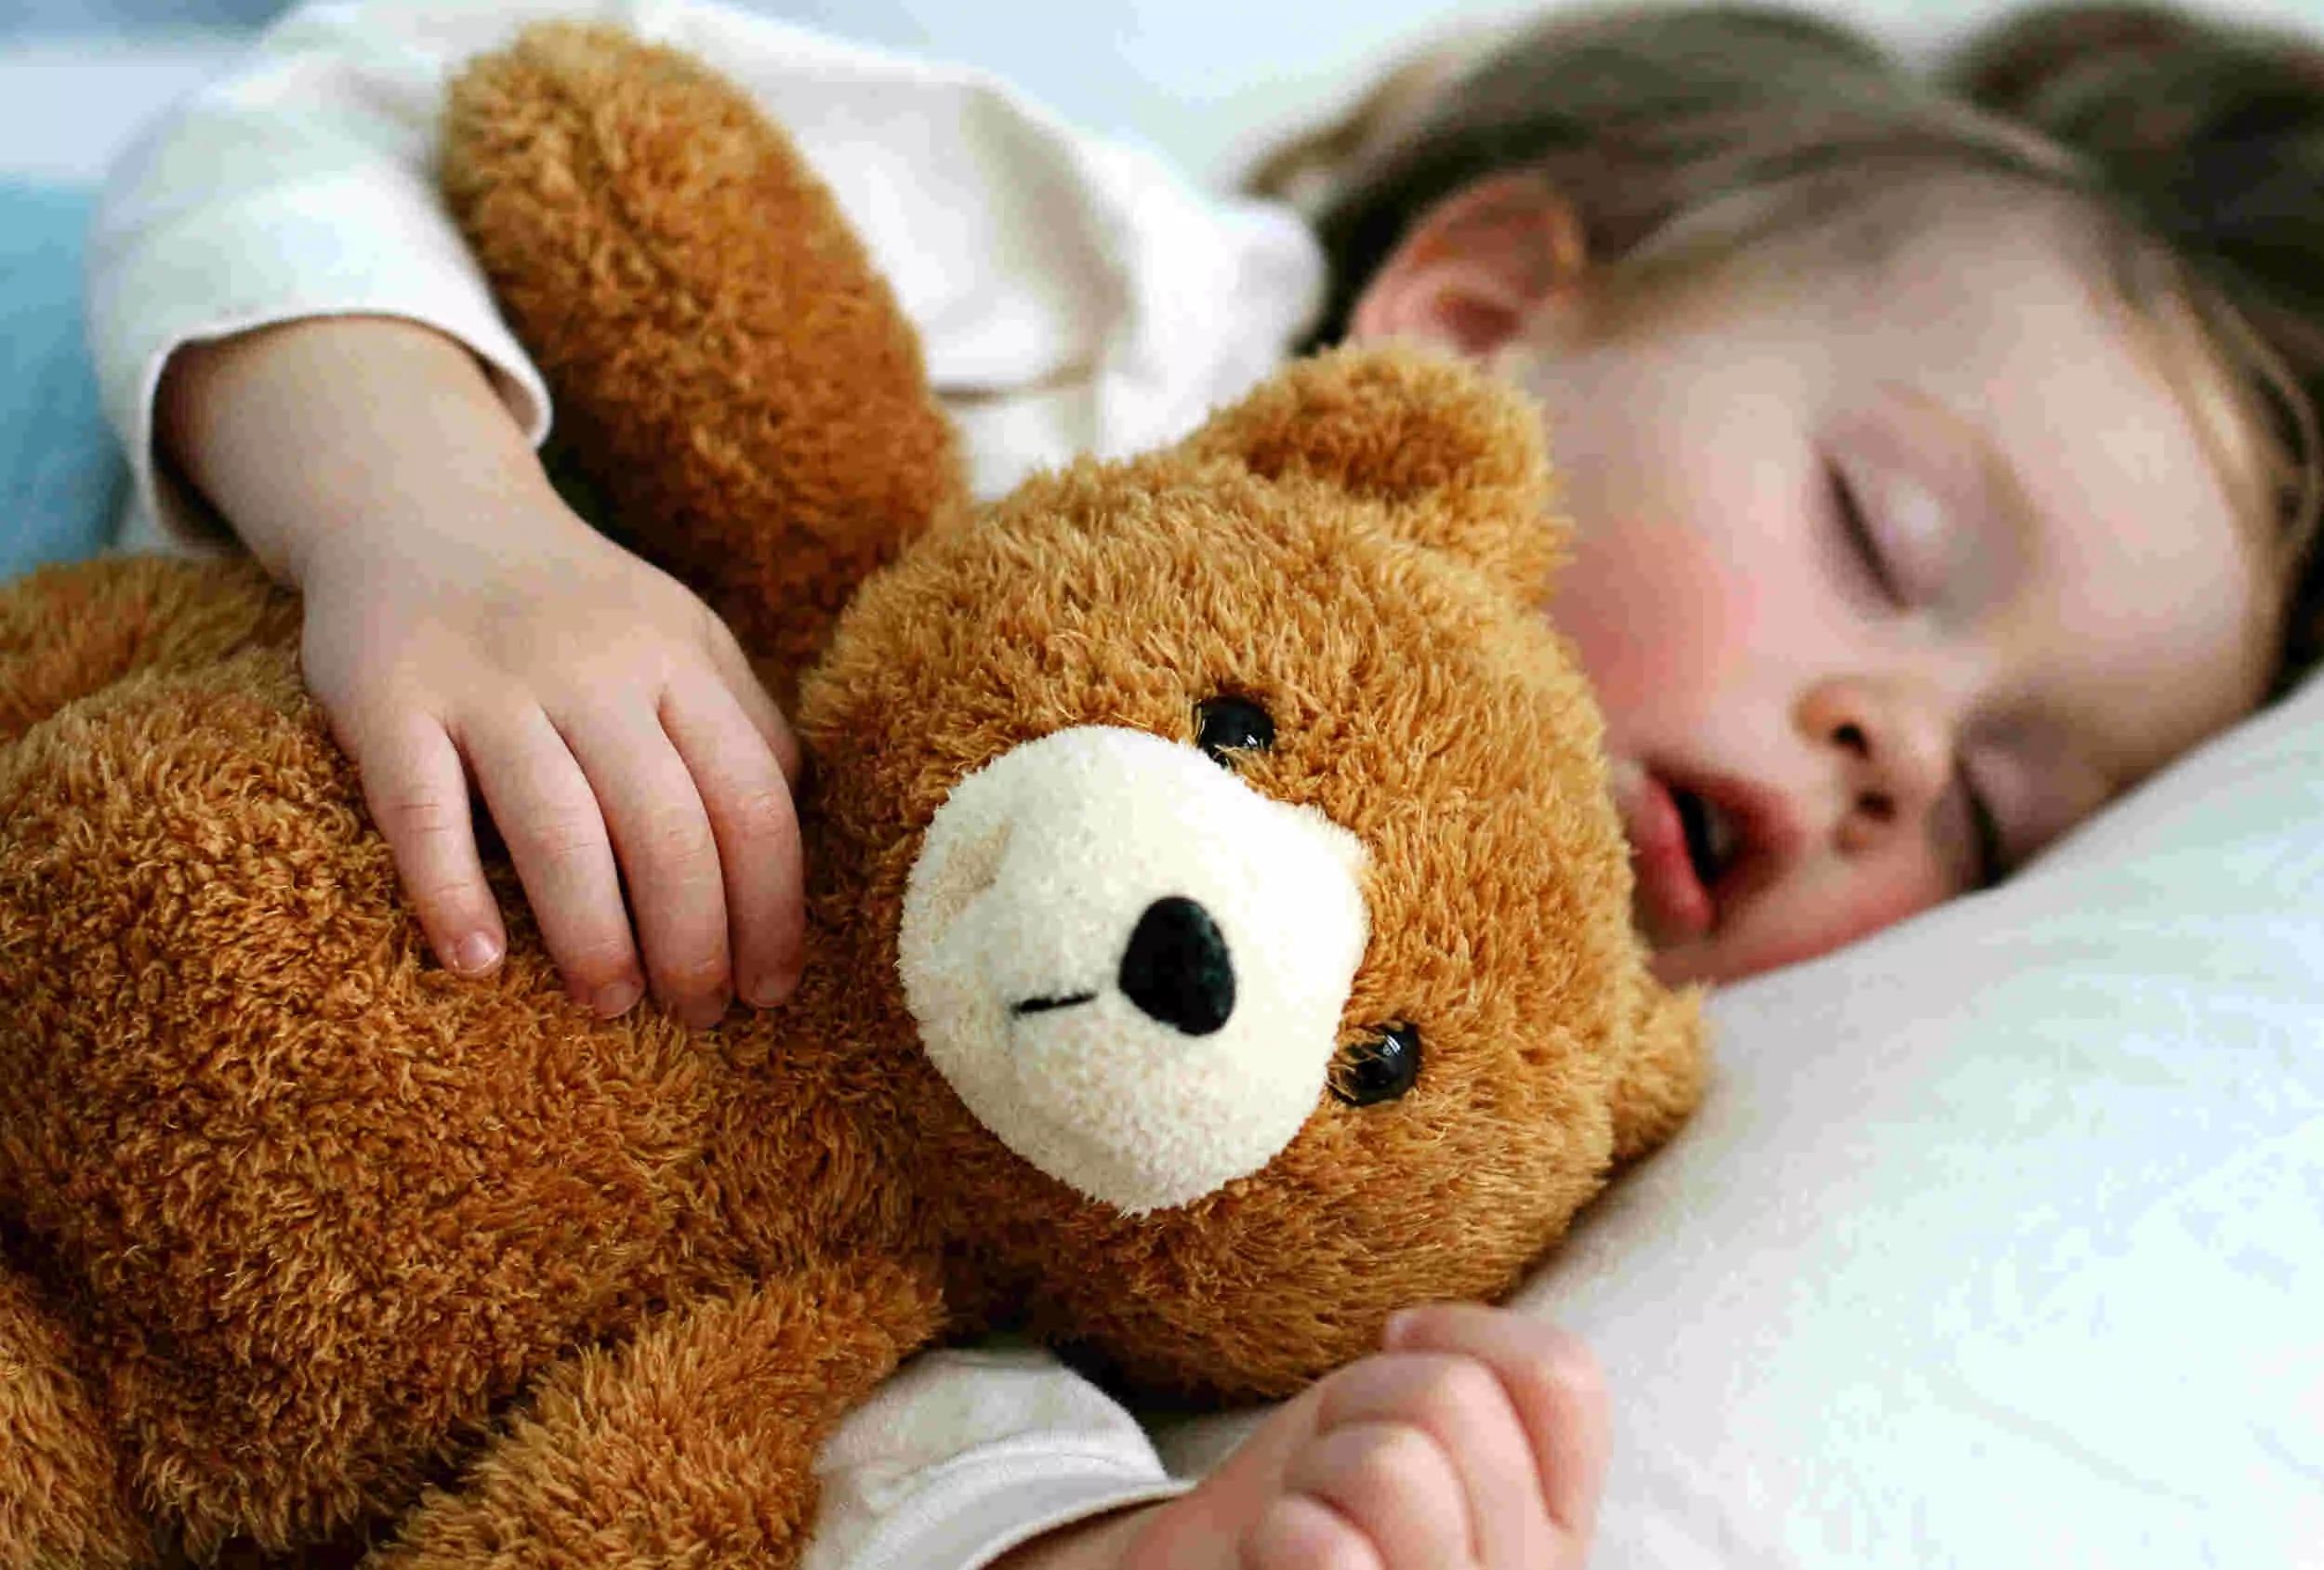 Stuffed Toys Pose Risk for Sleep Disorders in Children : Study